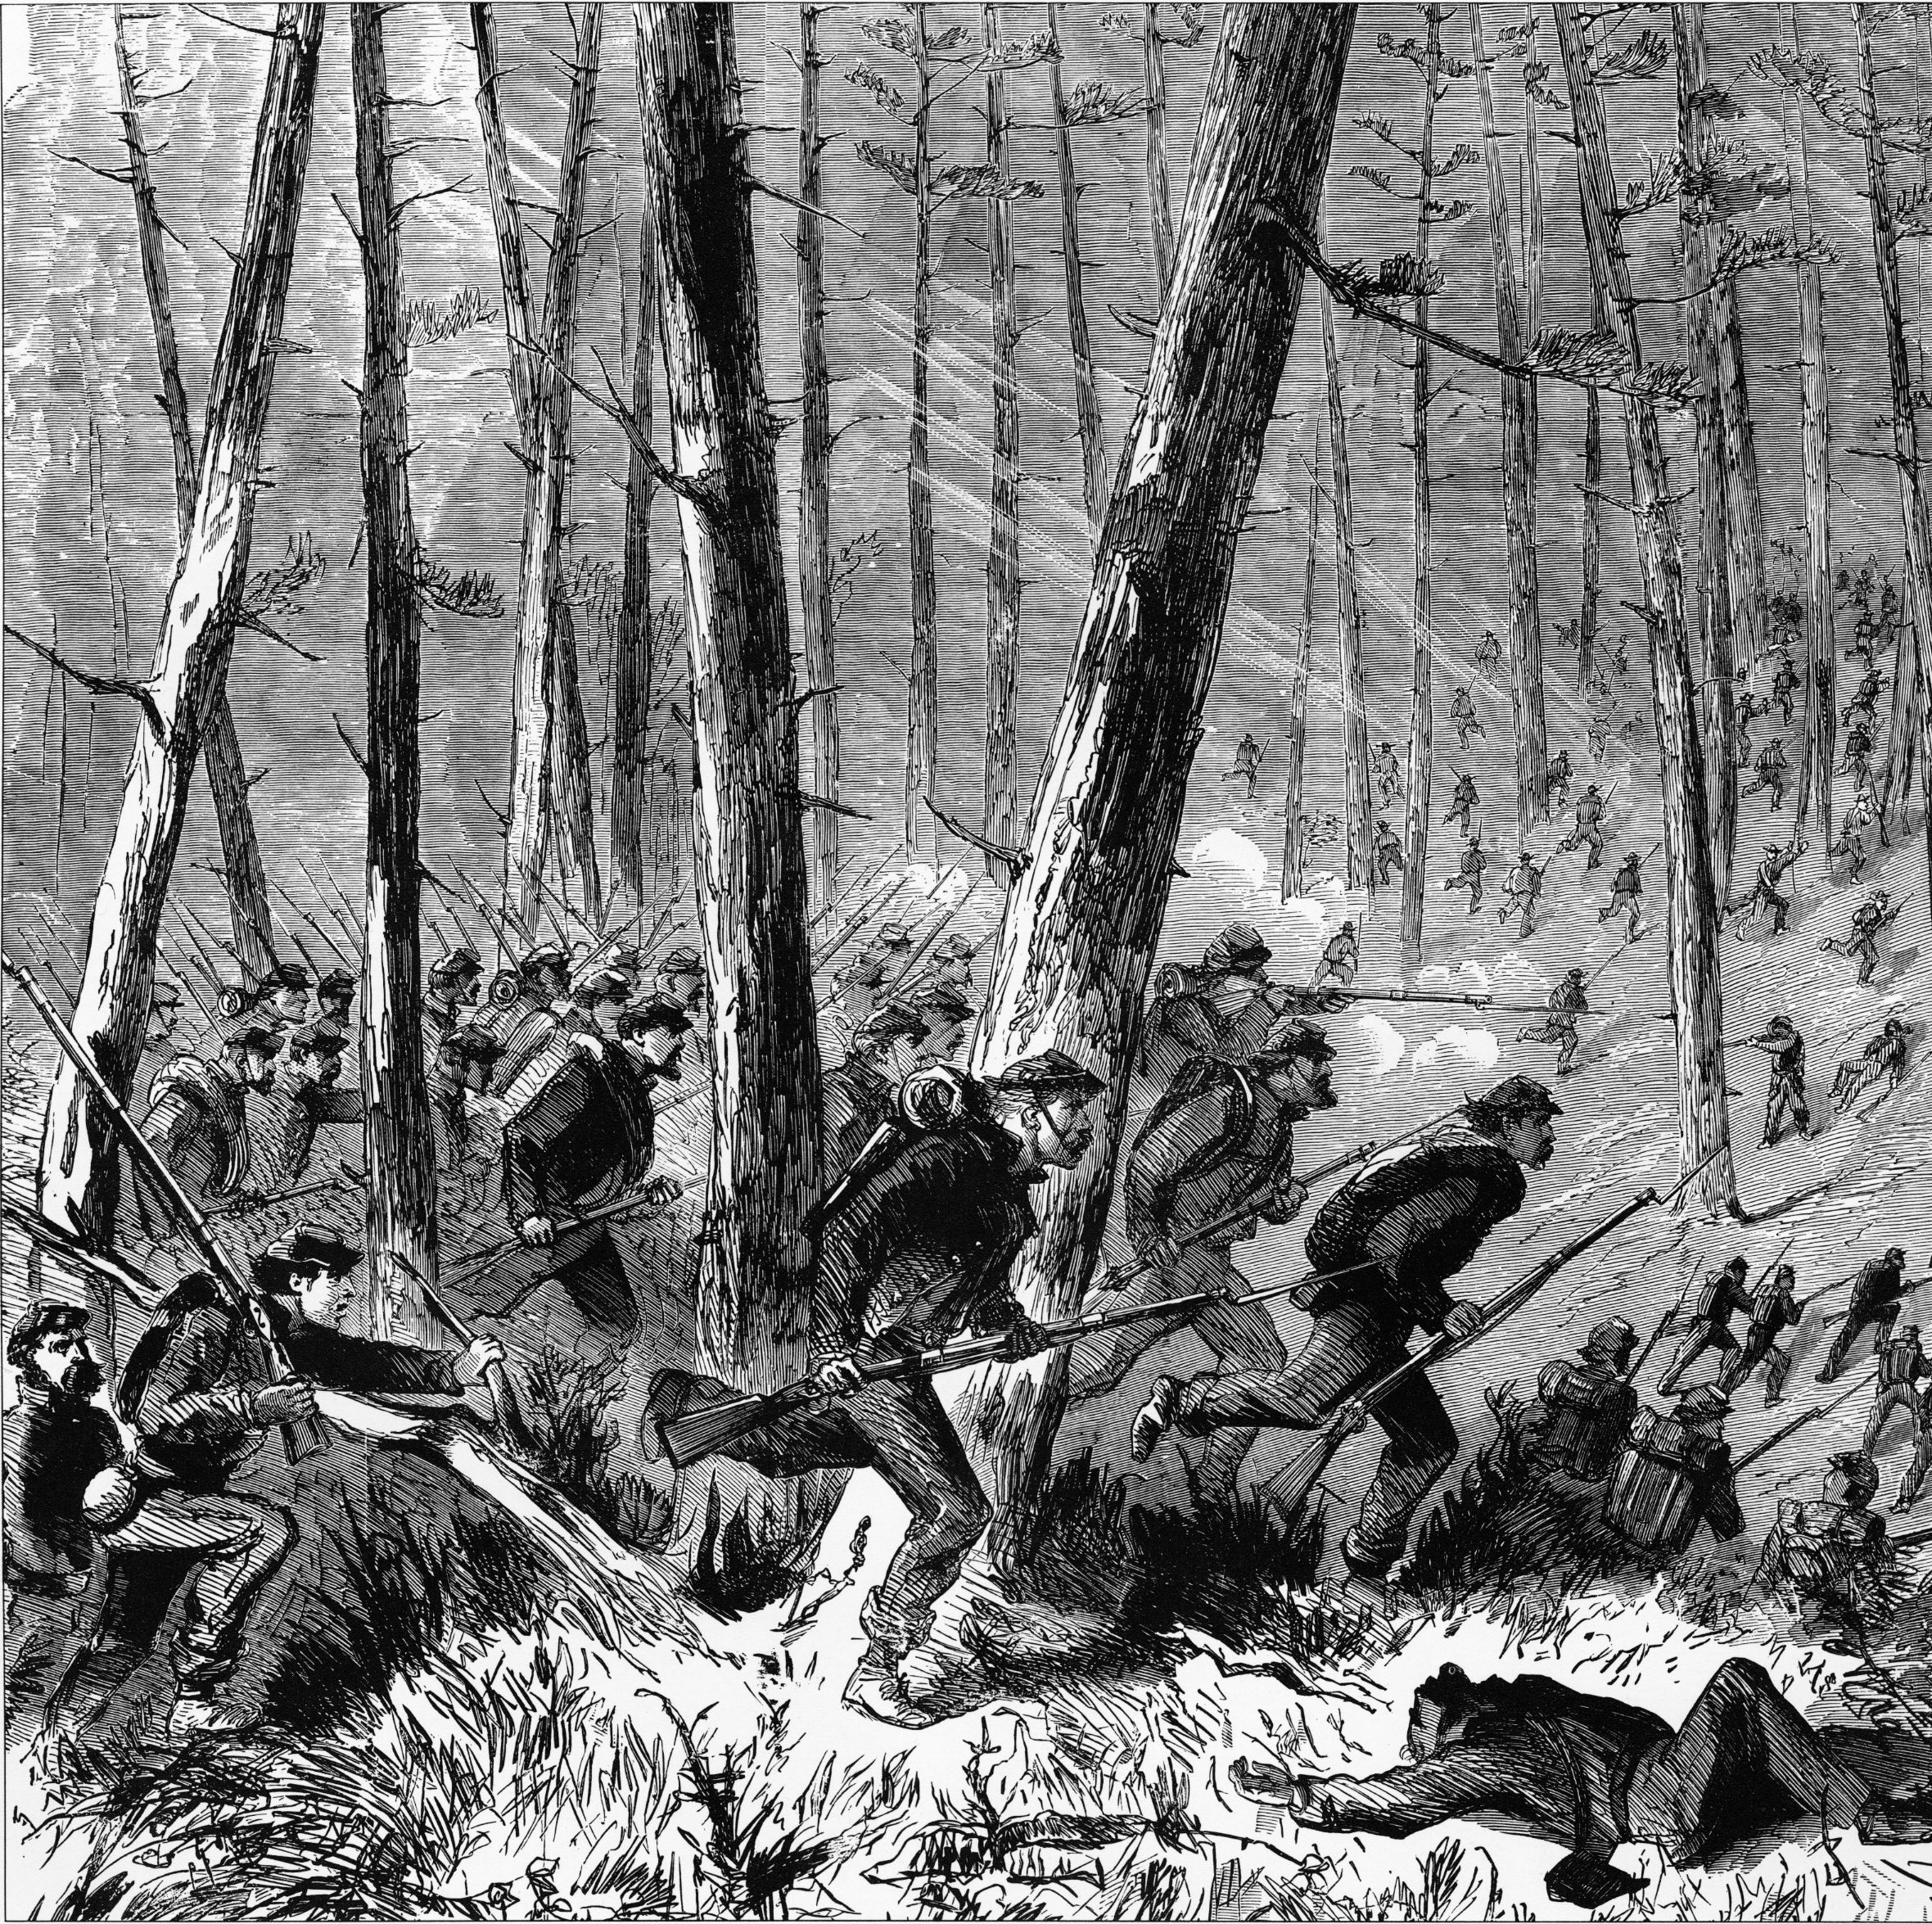 Battle-hardened Union forces pursue the retreating Confederates through dense woods at Champion’s Hill. Both sides considered the elevated battlefield a “literal hill of death.”